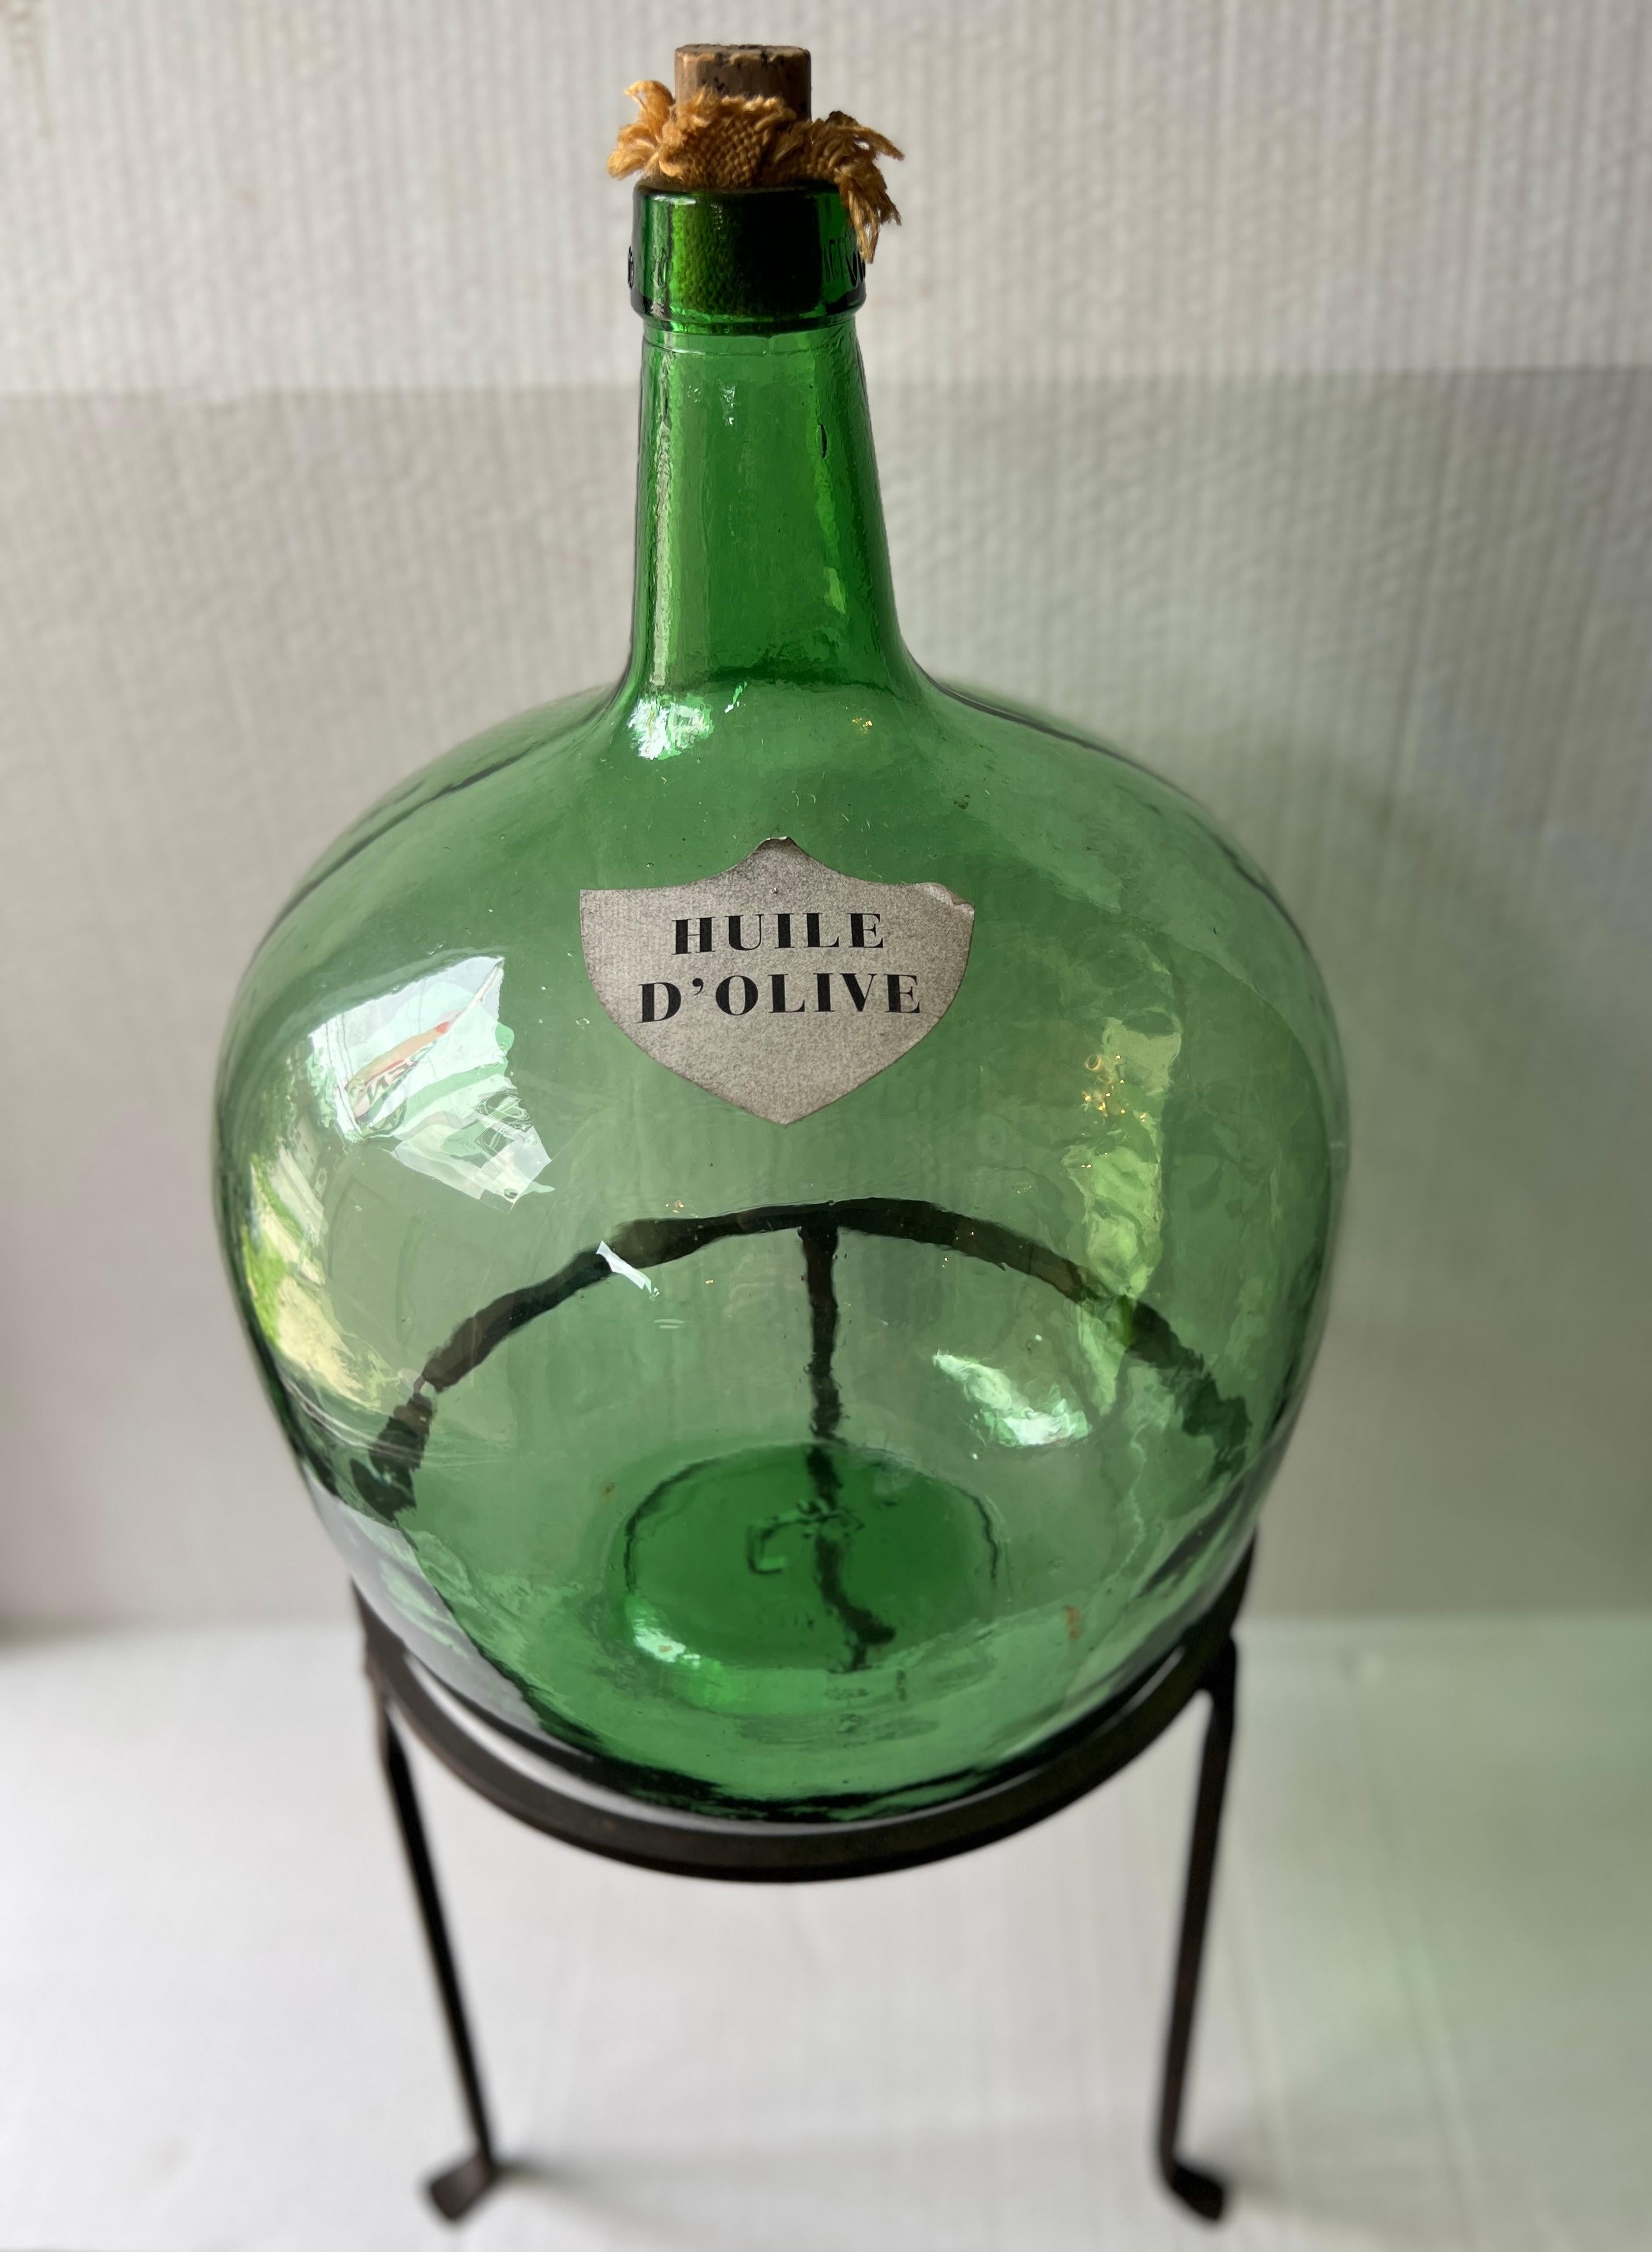 French Huile D'olive Green Glass Demijohns are charming, vintage glass containers that once held aromatic olive oil, now serving as elegant décor pieces.

The wrought iron stand is included.